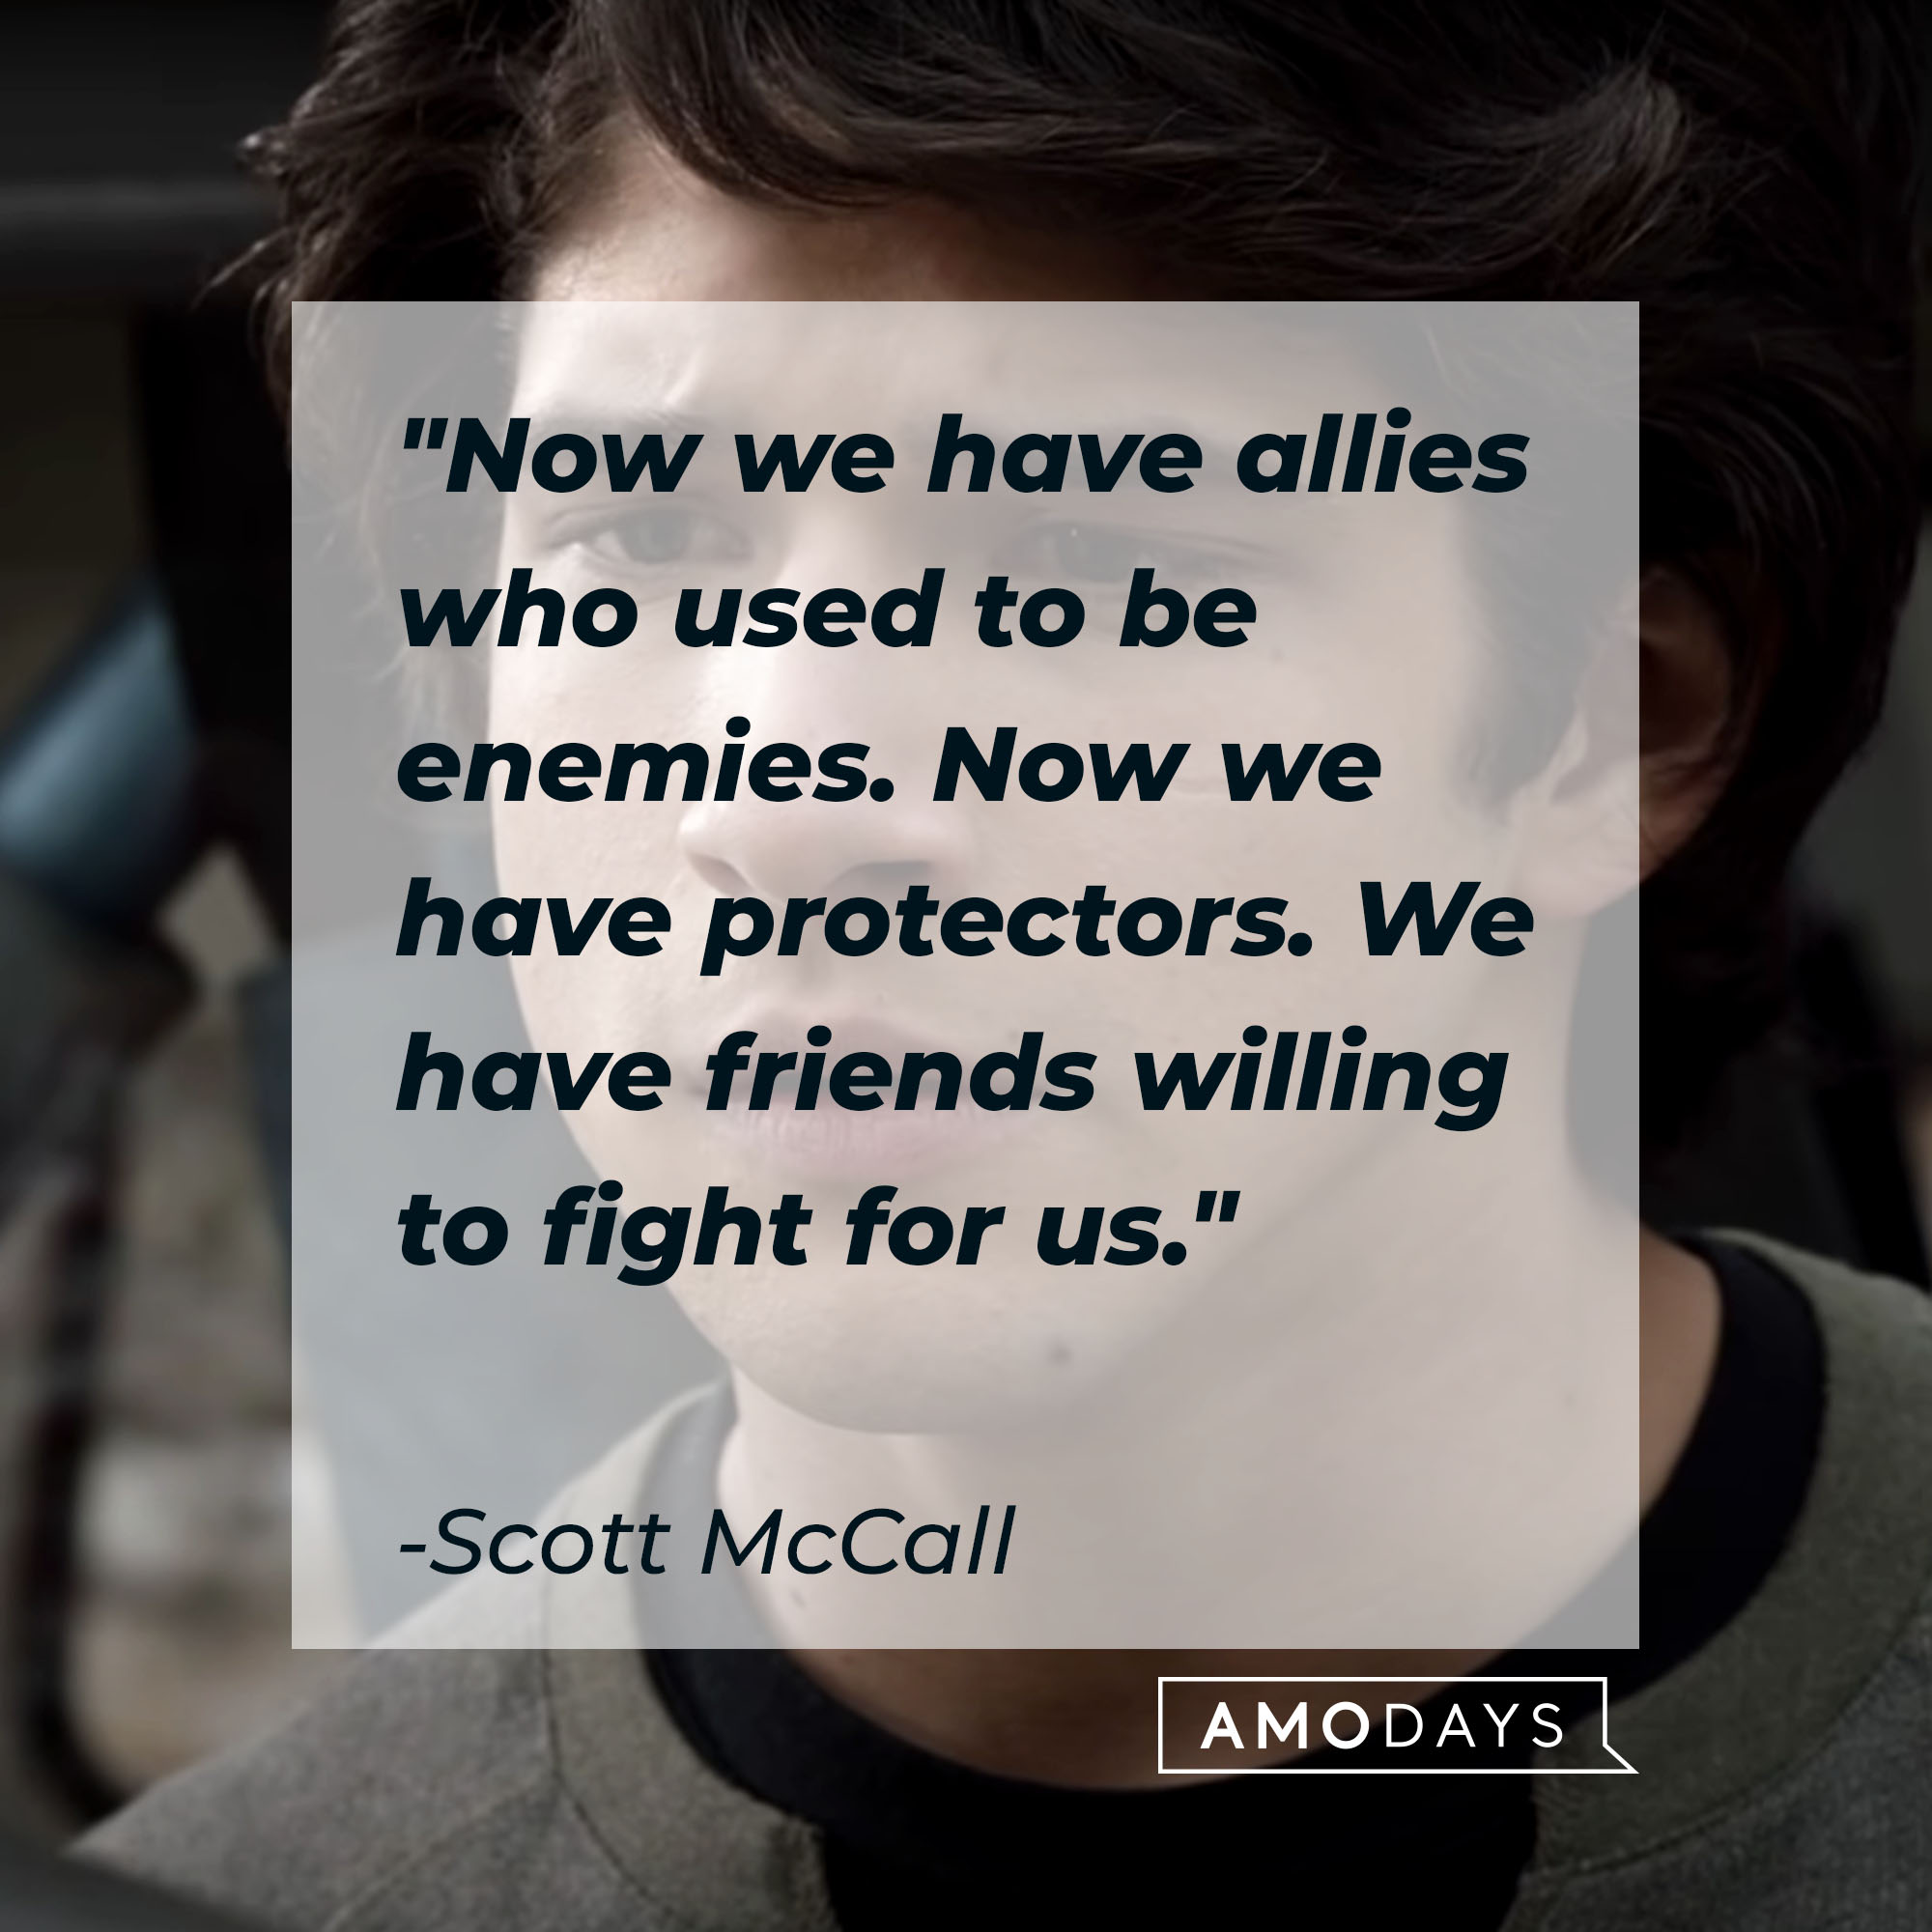 Scott McCall's quote: " Now we have allies who used to be enemies. Now we have protectors. We have friends willing to fight for us" | Source: Youtube.com/WolfWatch